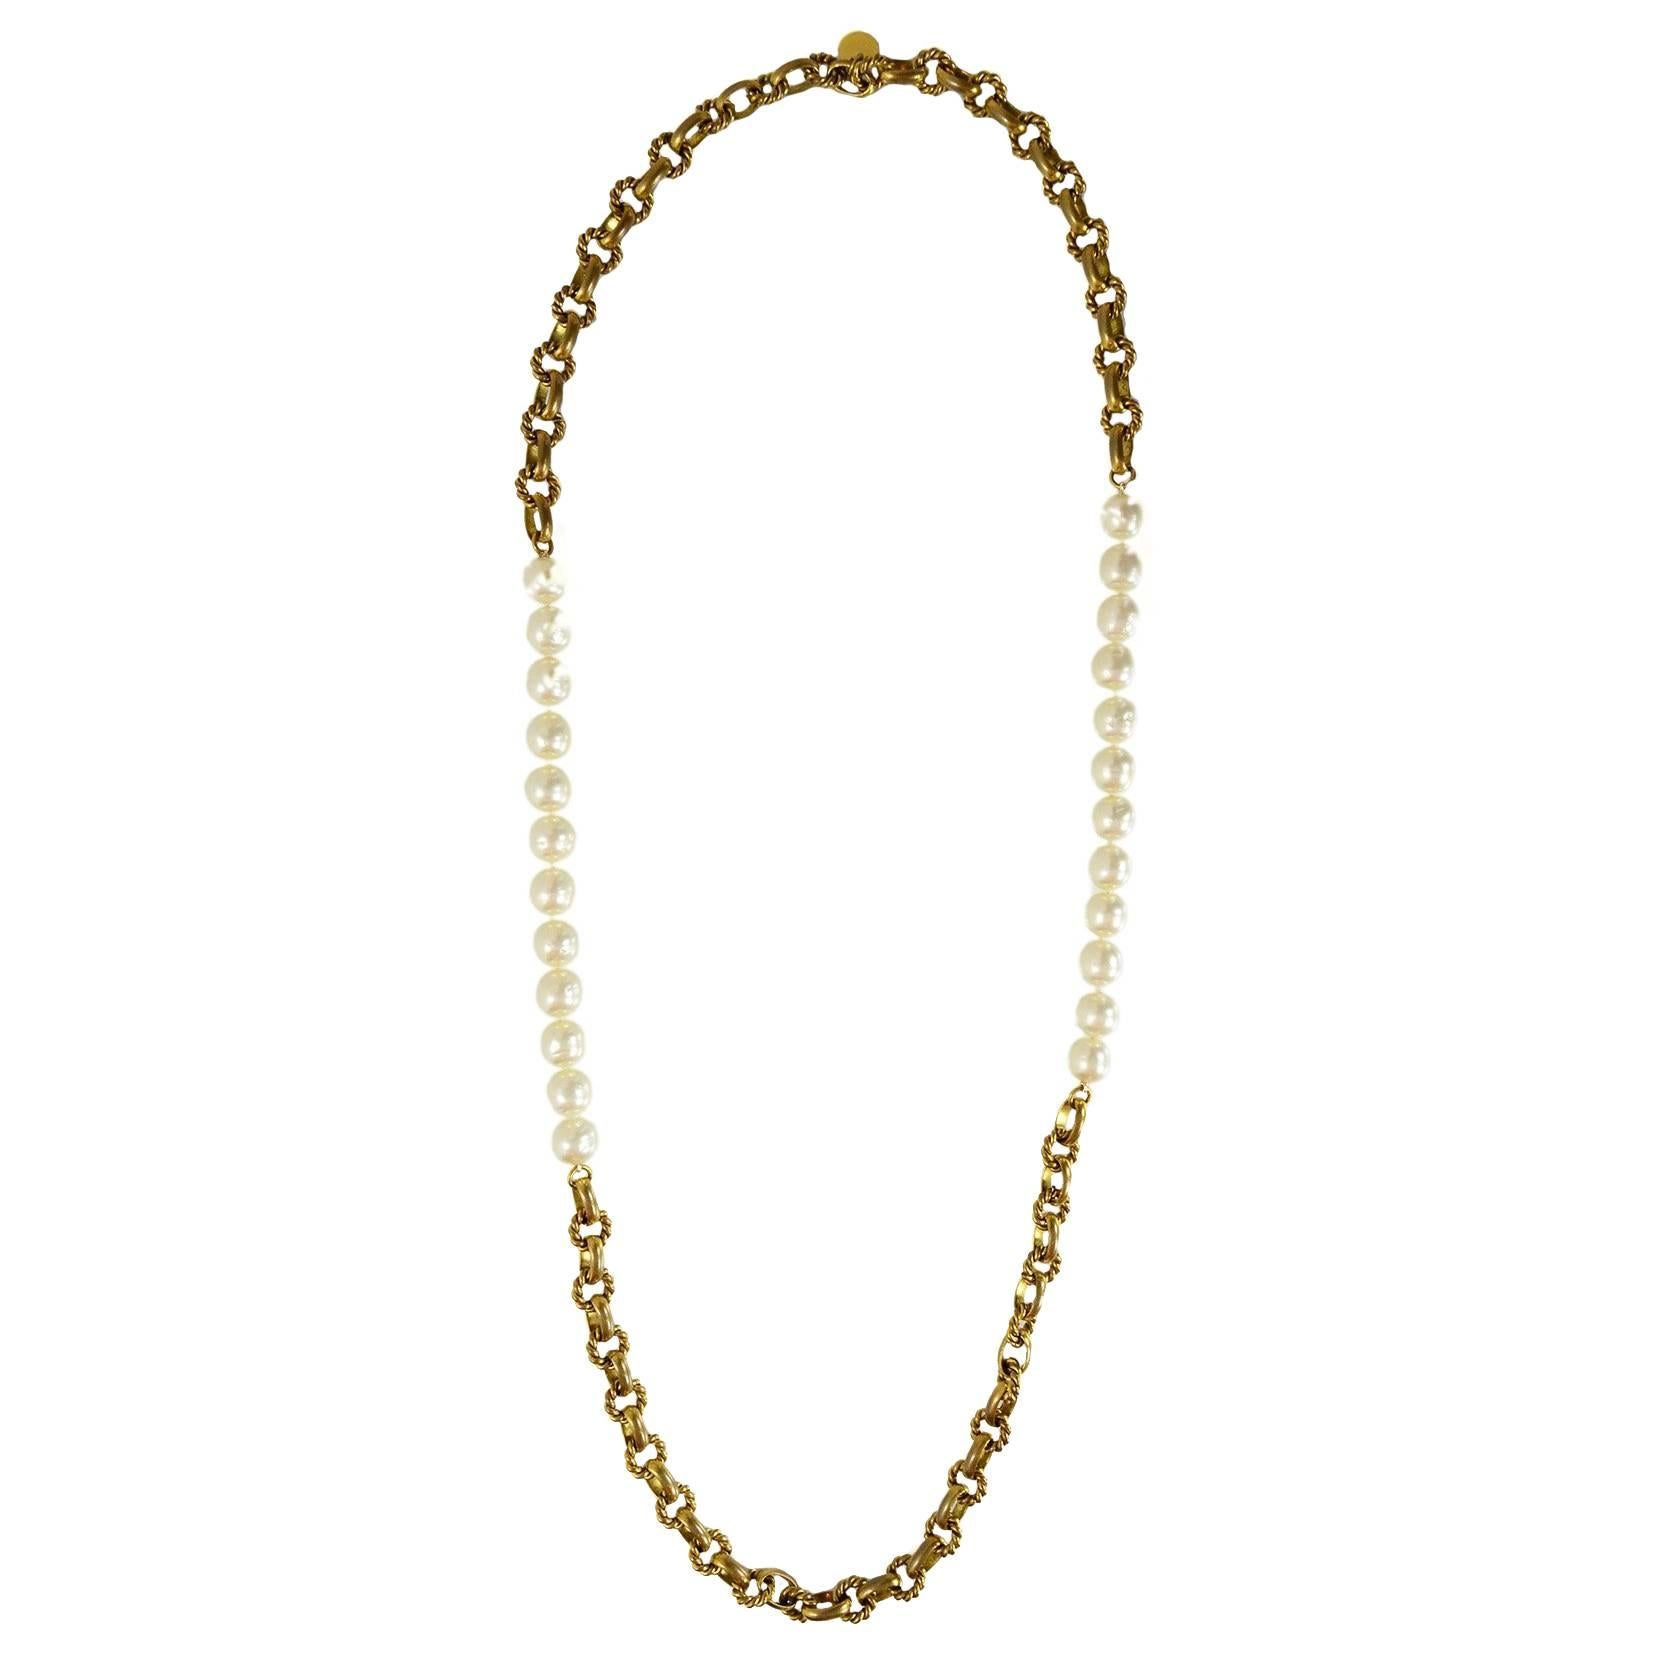 Chanel Vintage '80s Gold Cable Chain Link & Pearl Necklace